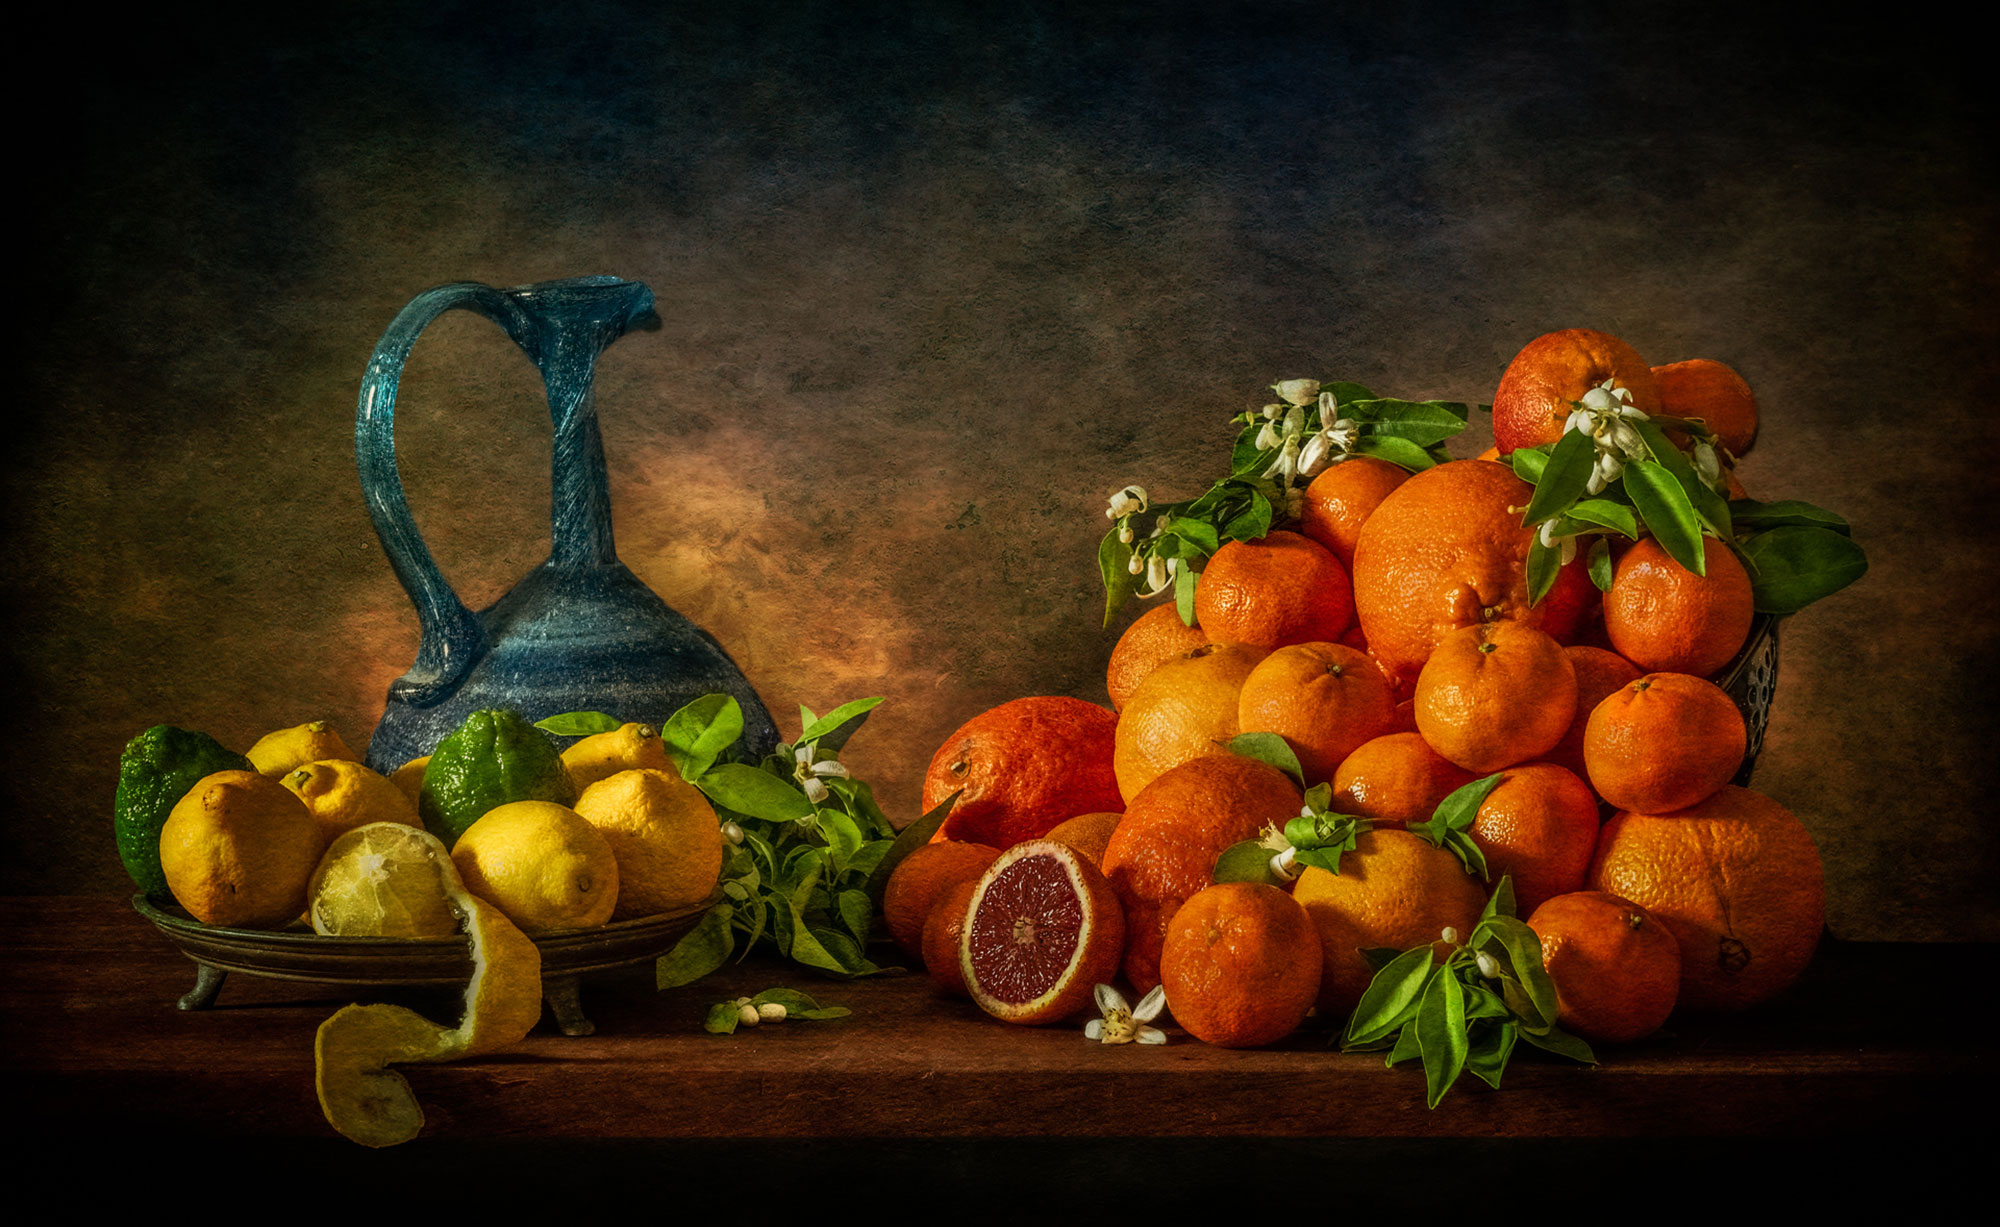 Still life photography, an obsession